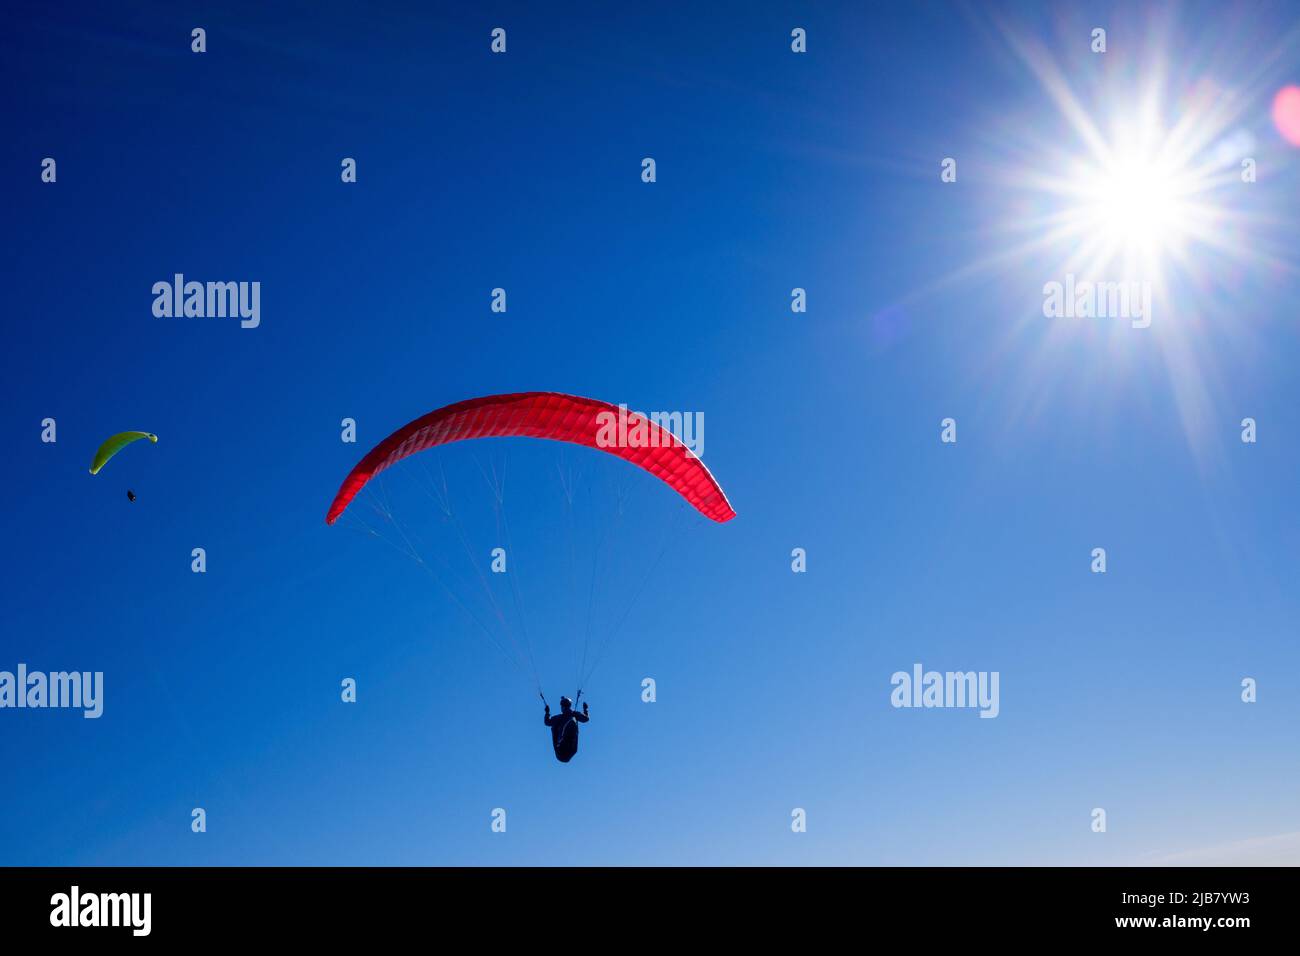 Paragliders glide through the air by launching themselves from high mountains with special parachutes. Stock Photo